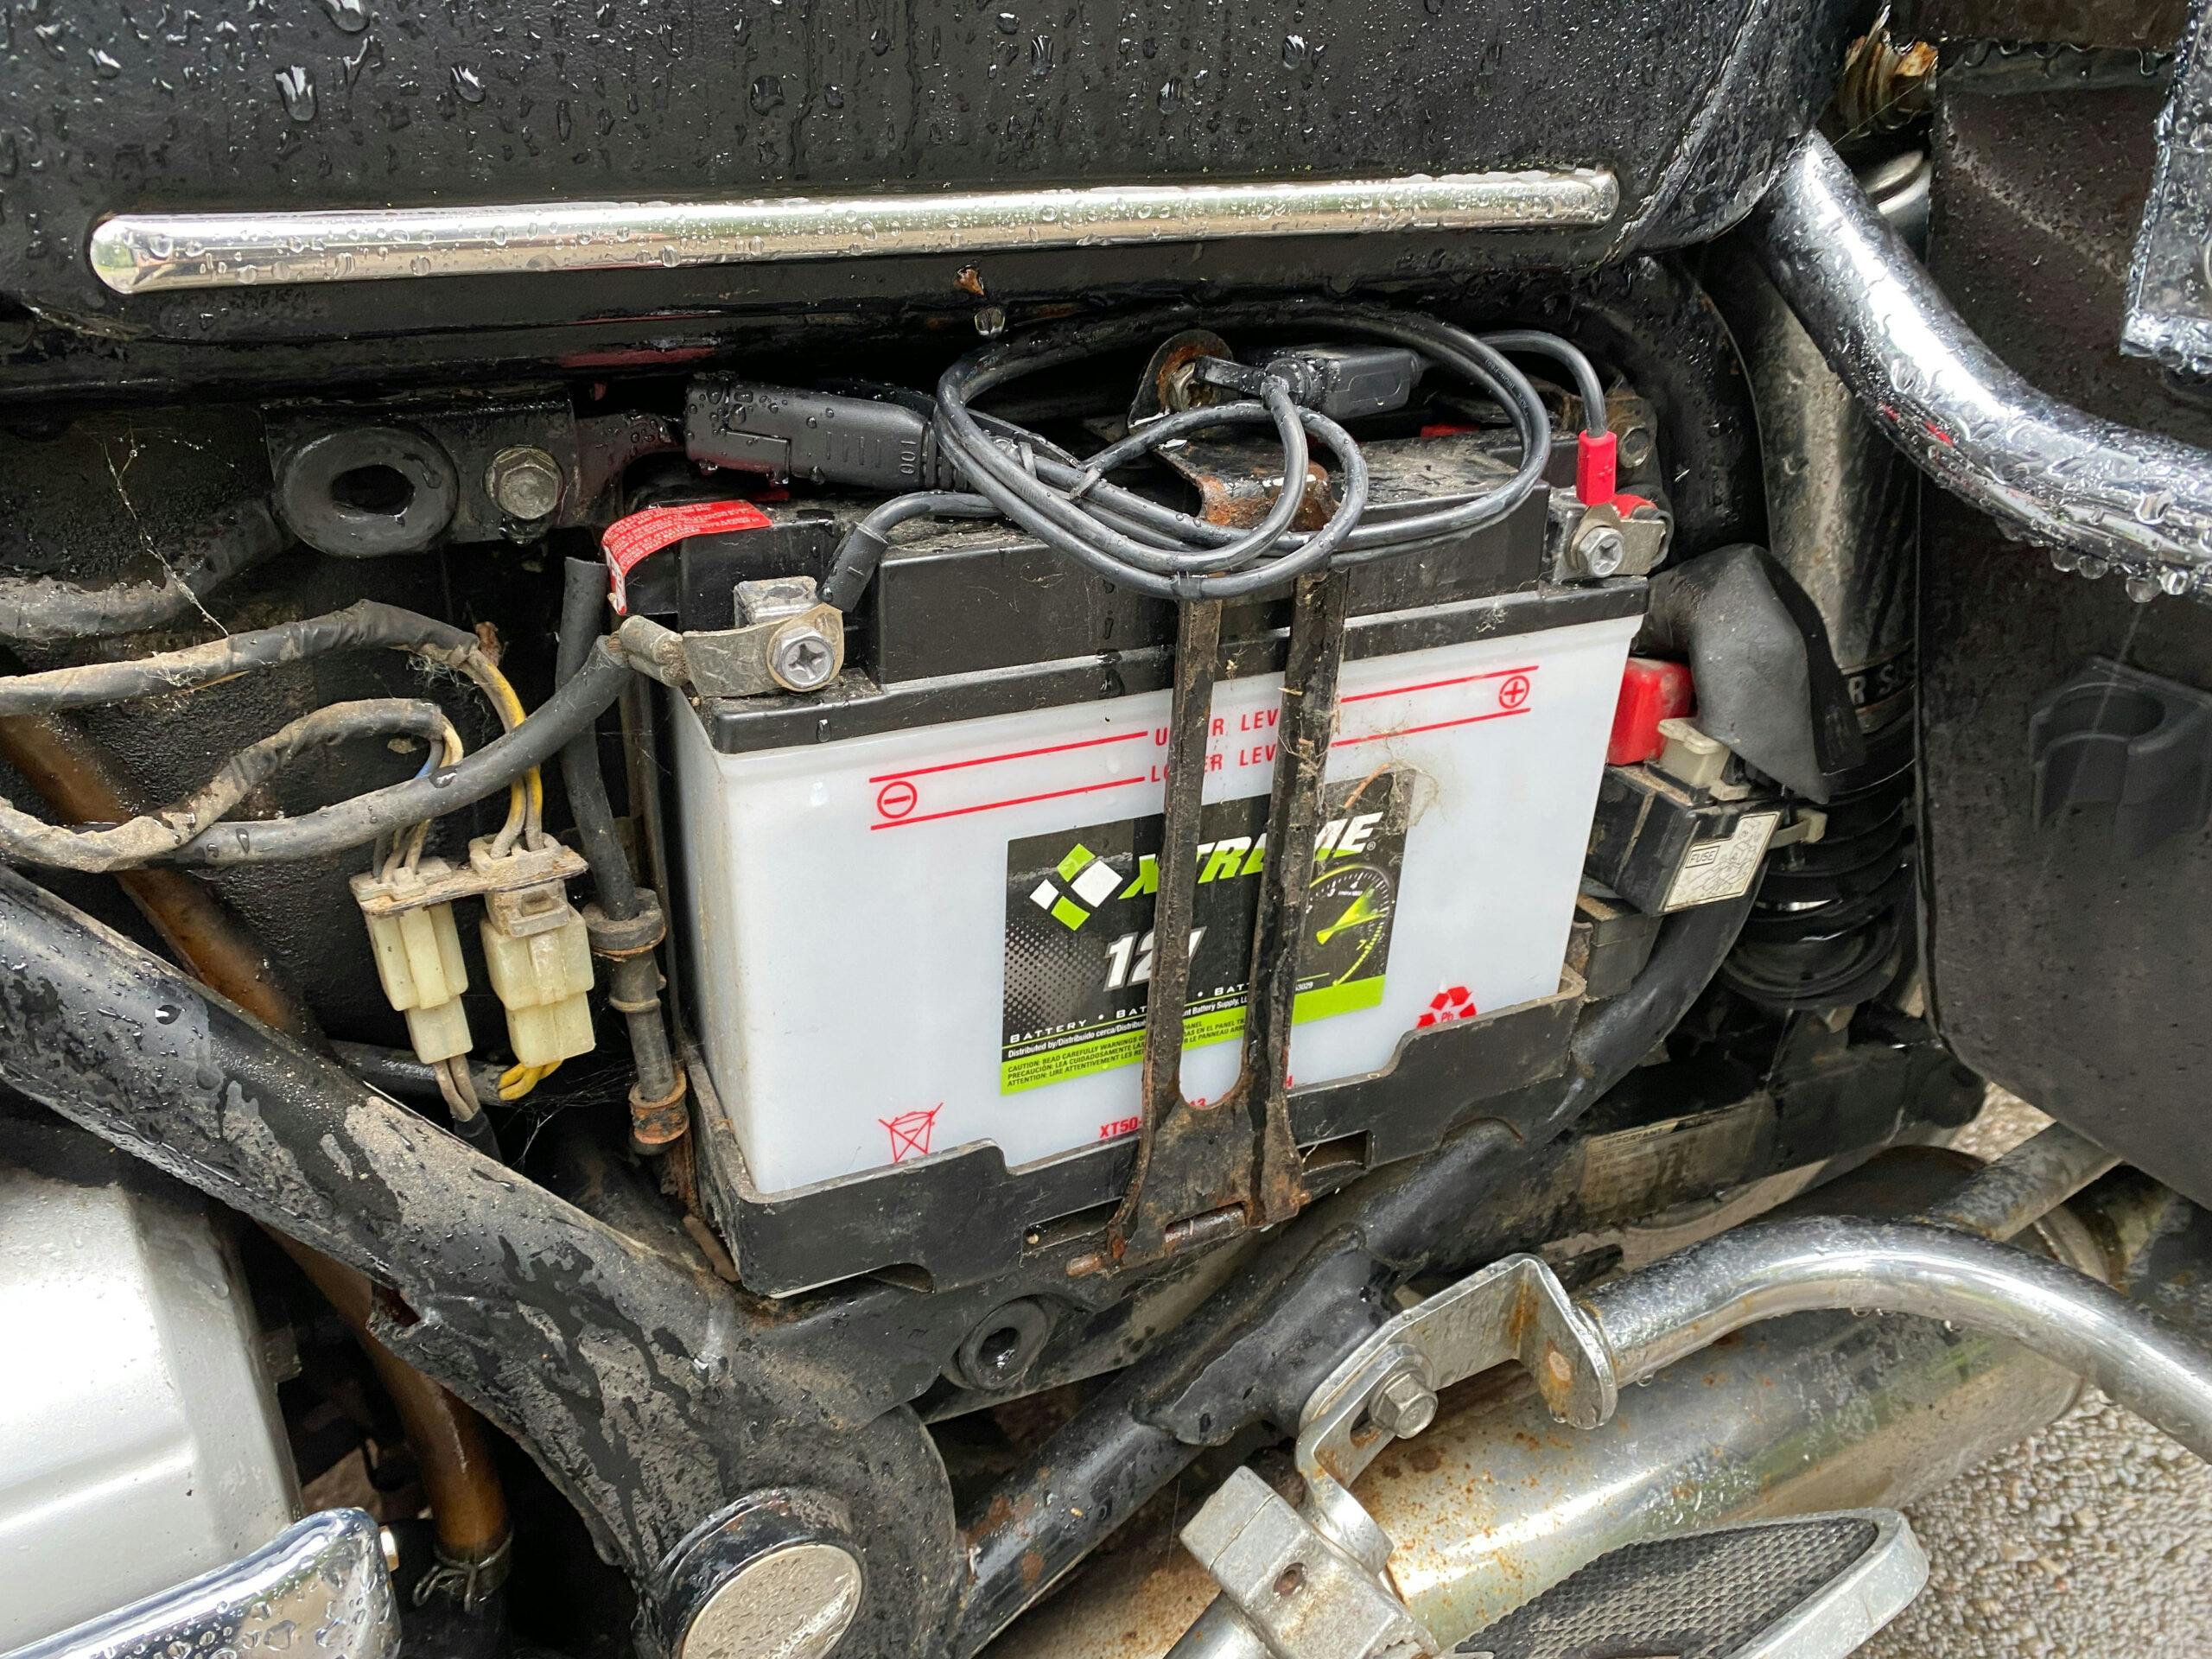 3 tips for storing car batteries - Hagerty Media